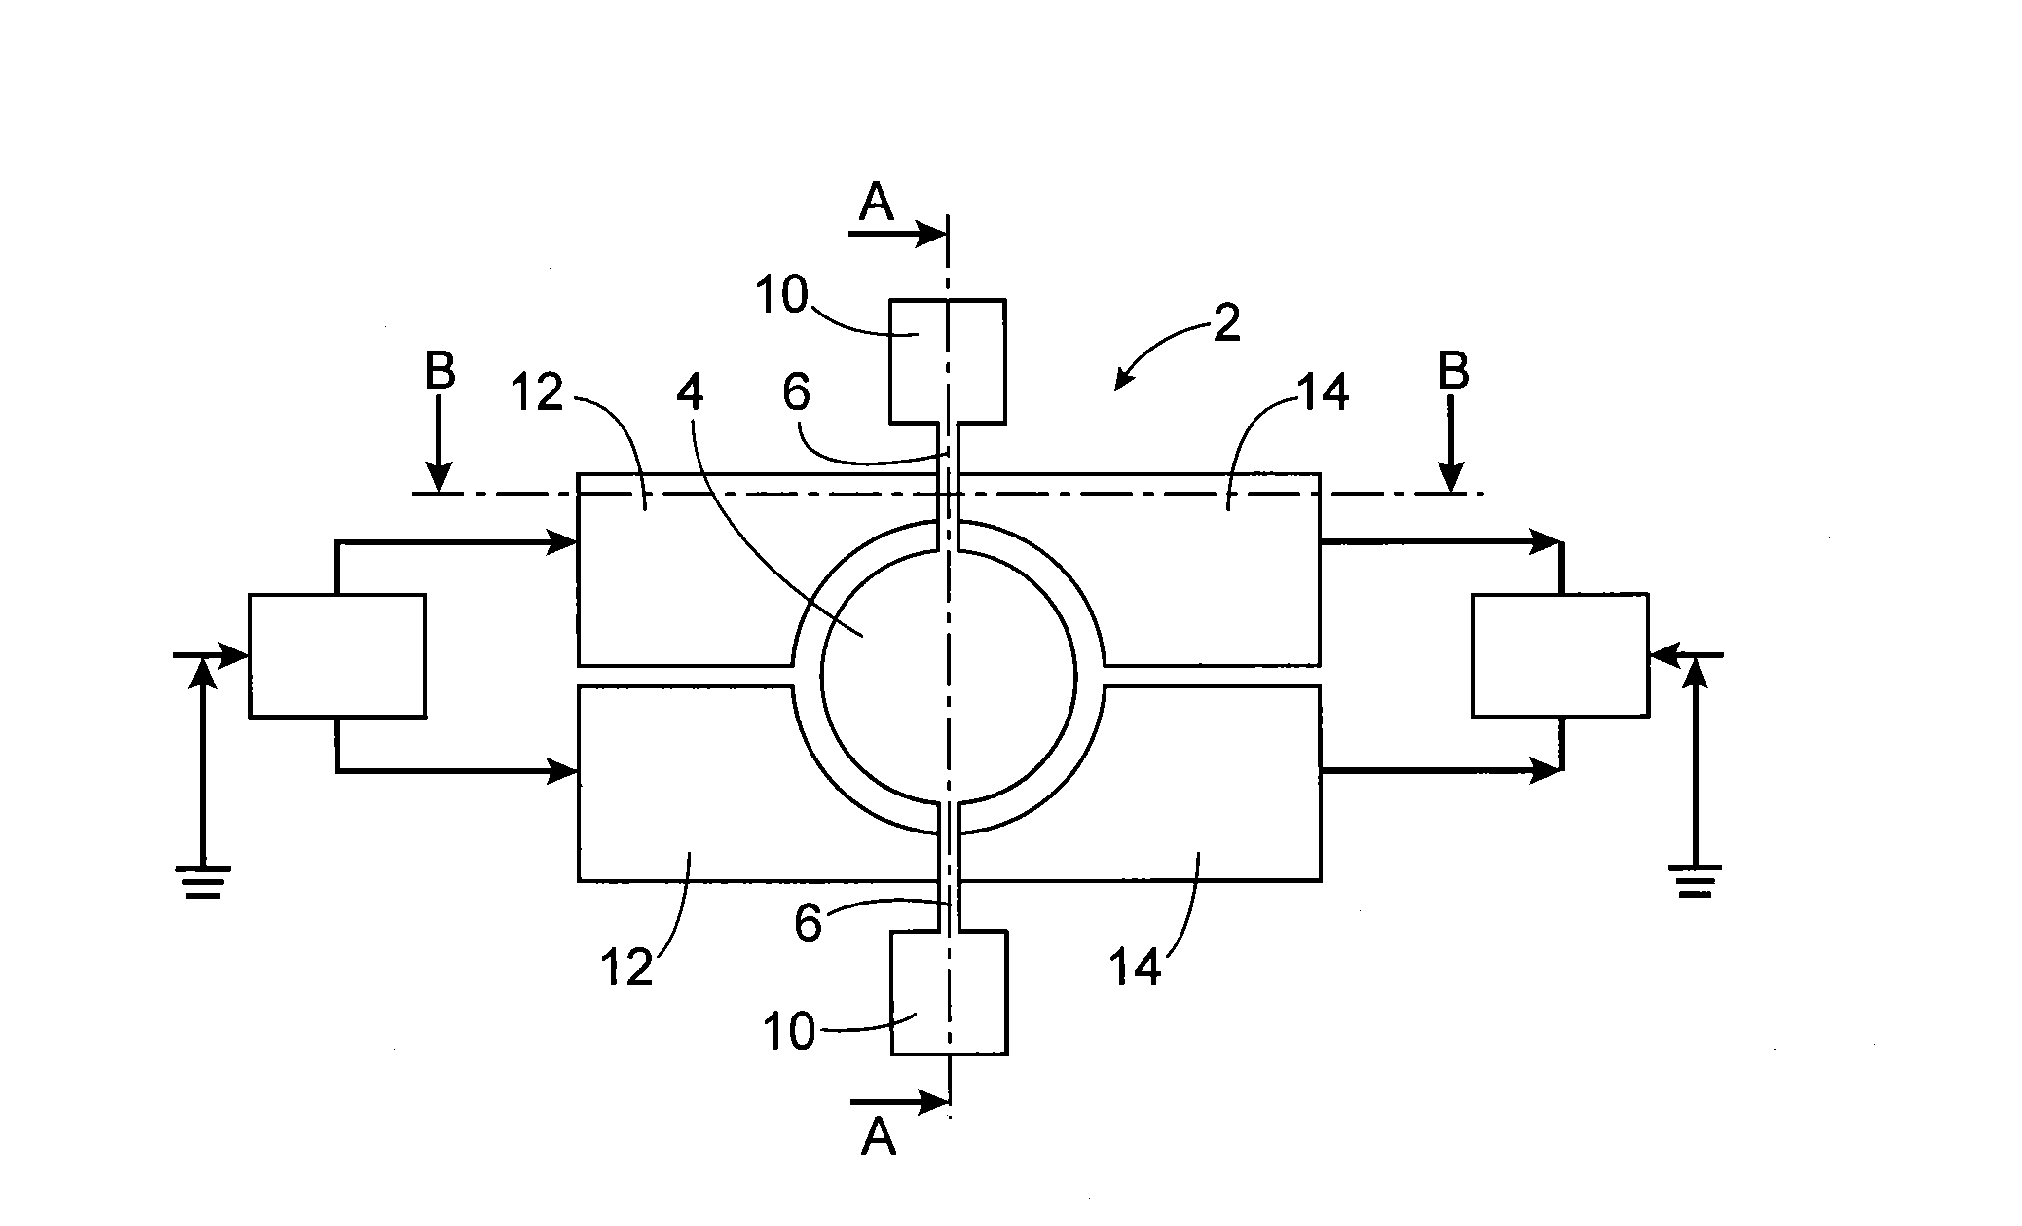 Bolometer having frequency detection